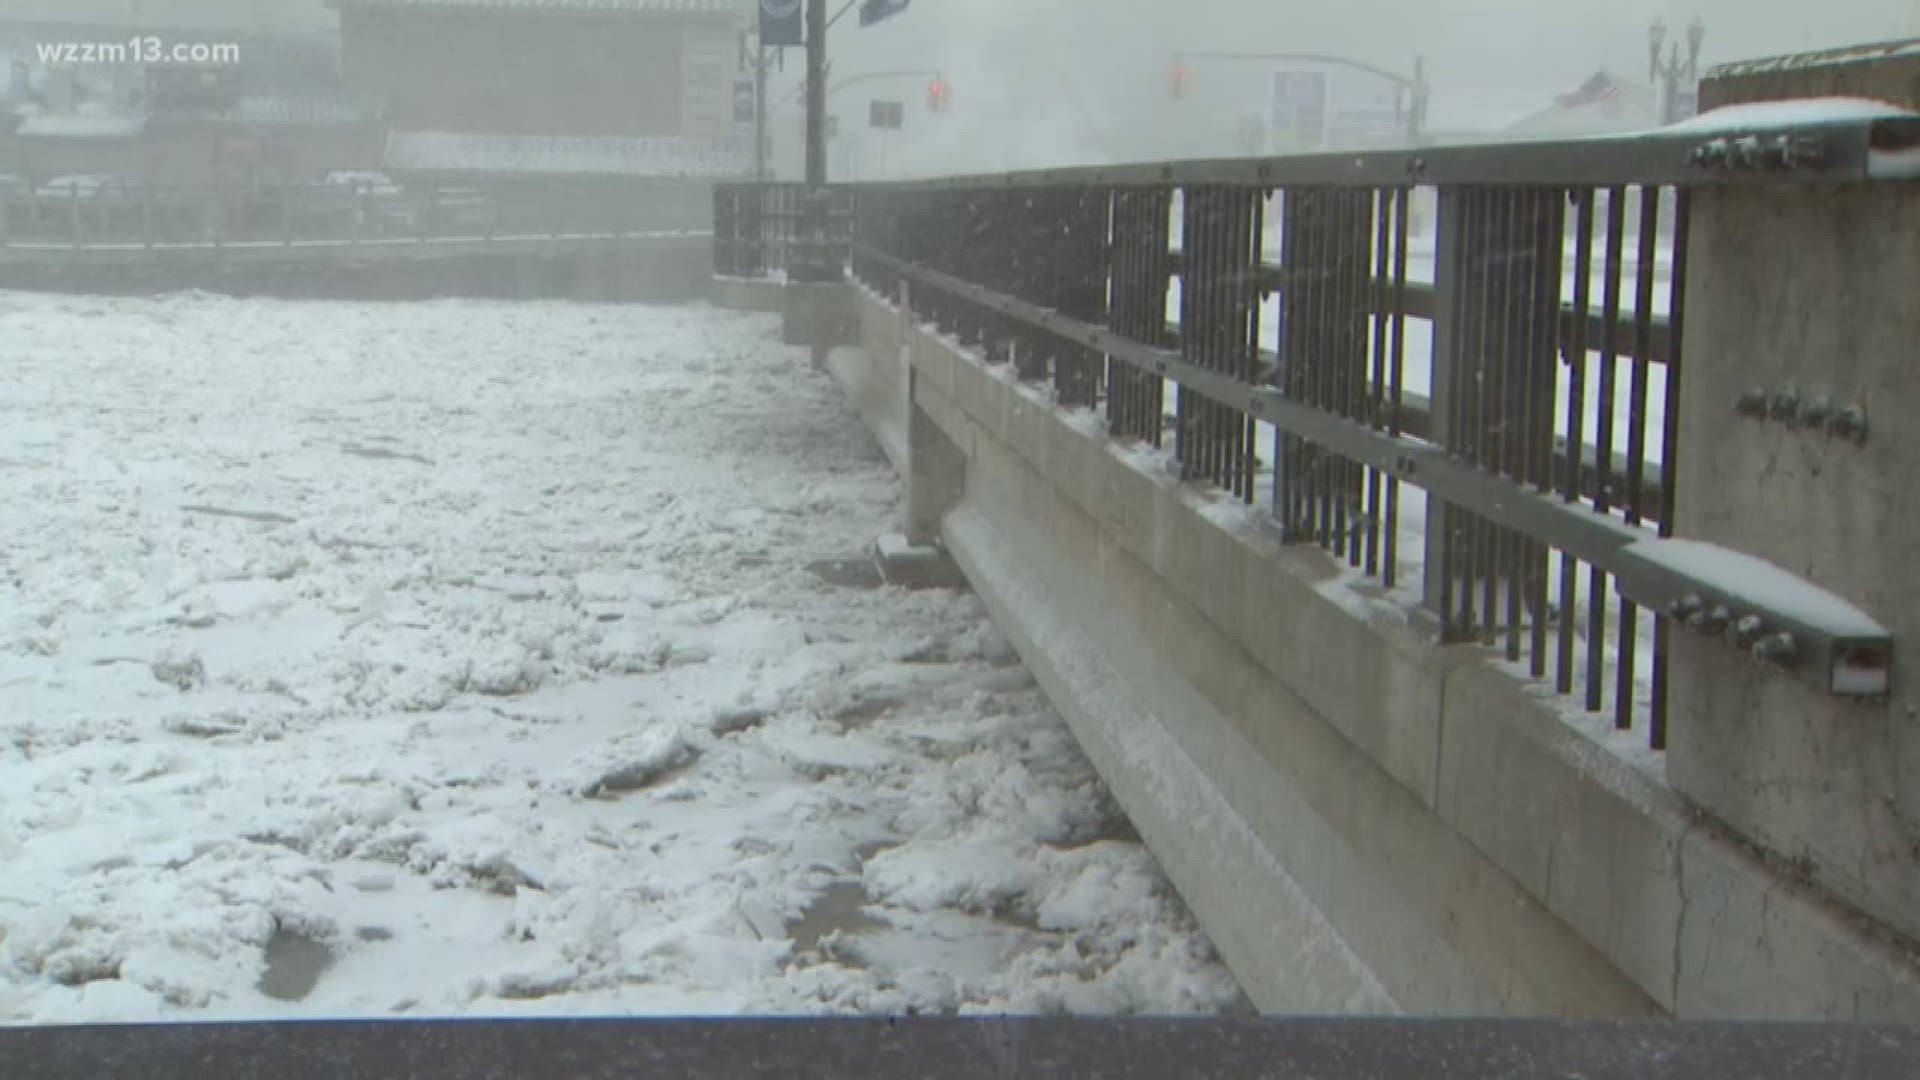 Flooding is a problem once again in the city of Portland. Rising water due to an ice jam on the Grand River is forcing emergency workers to carry out evacuations.